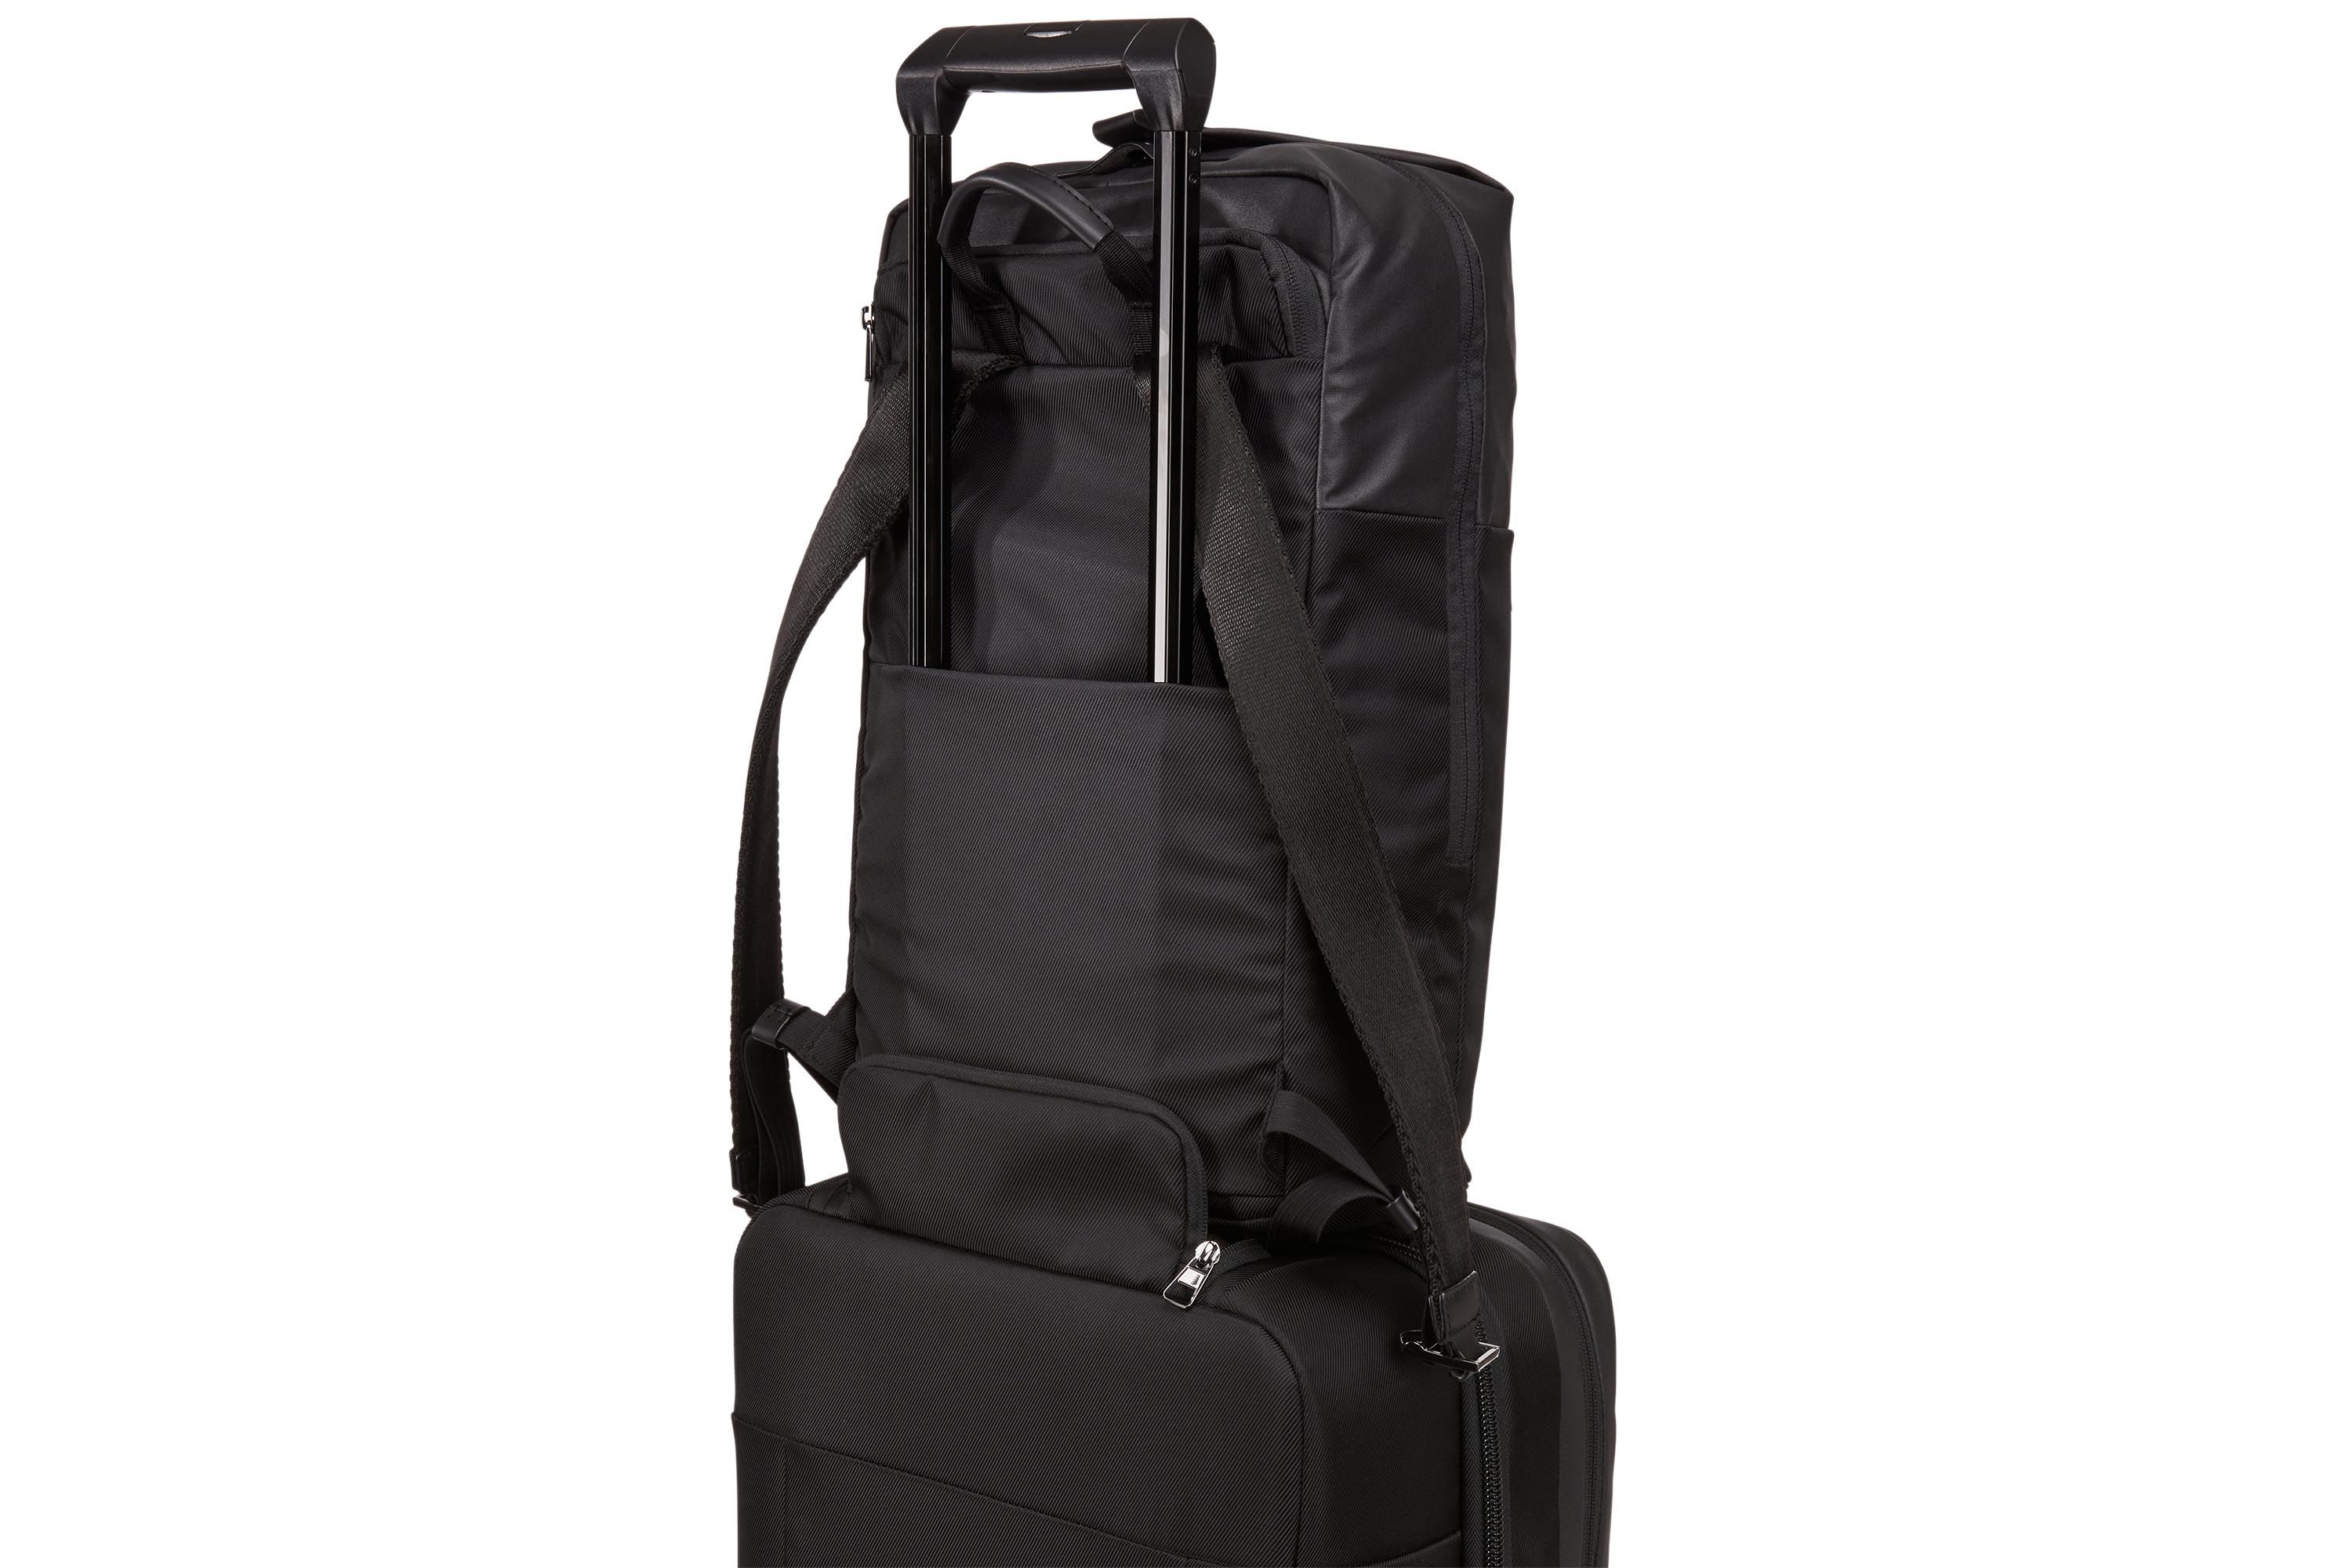 Thule Spira Backpack attached to rolling luggage thanks to pass-through panel